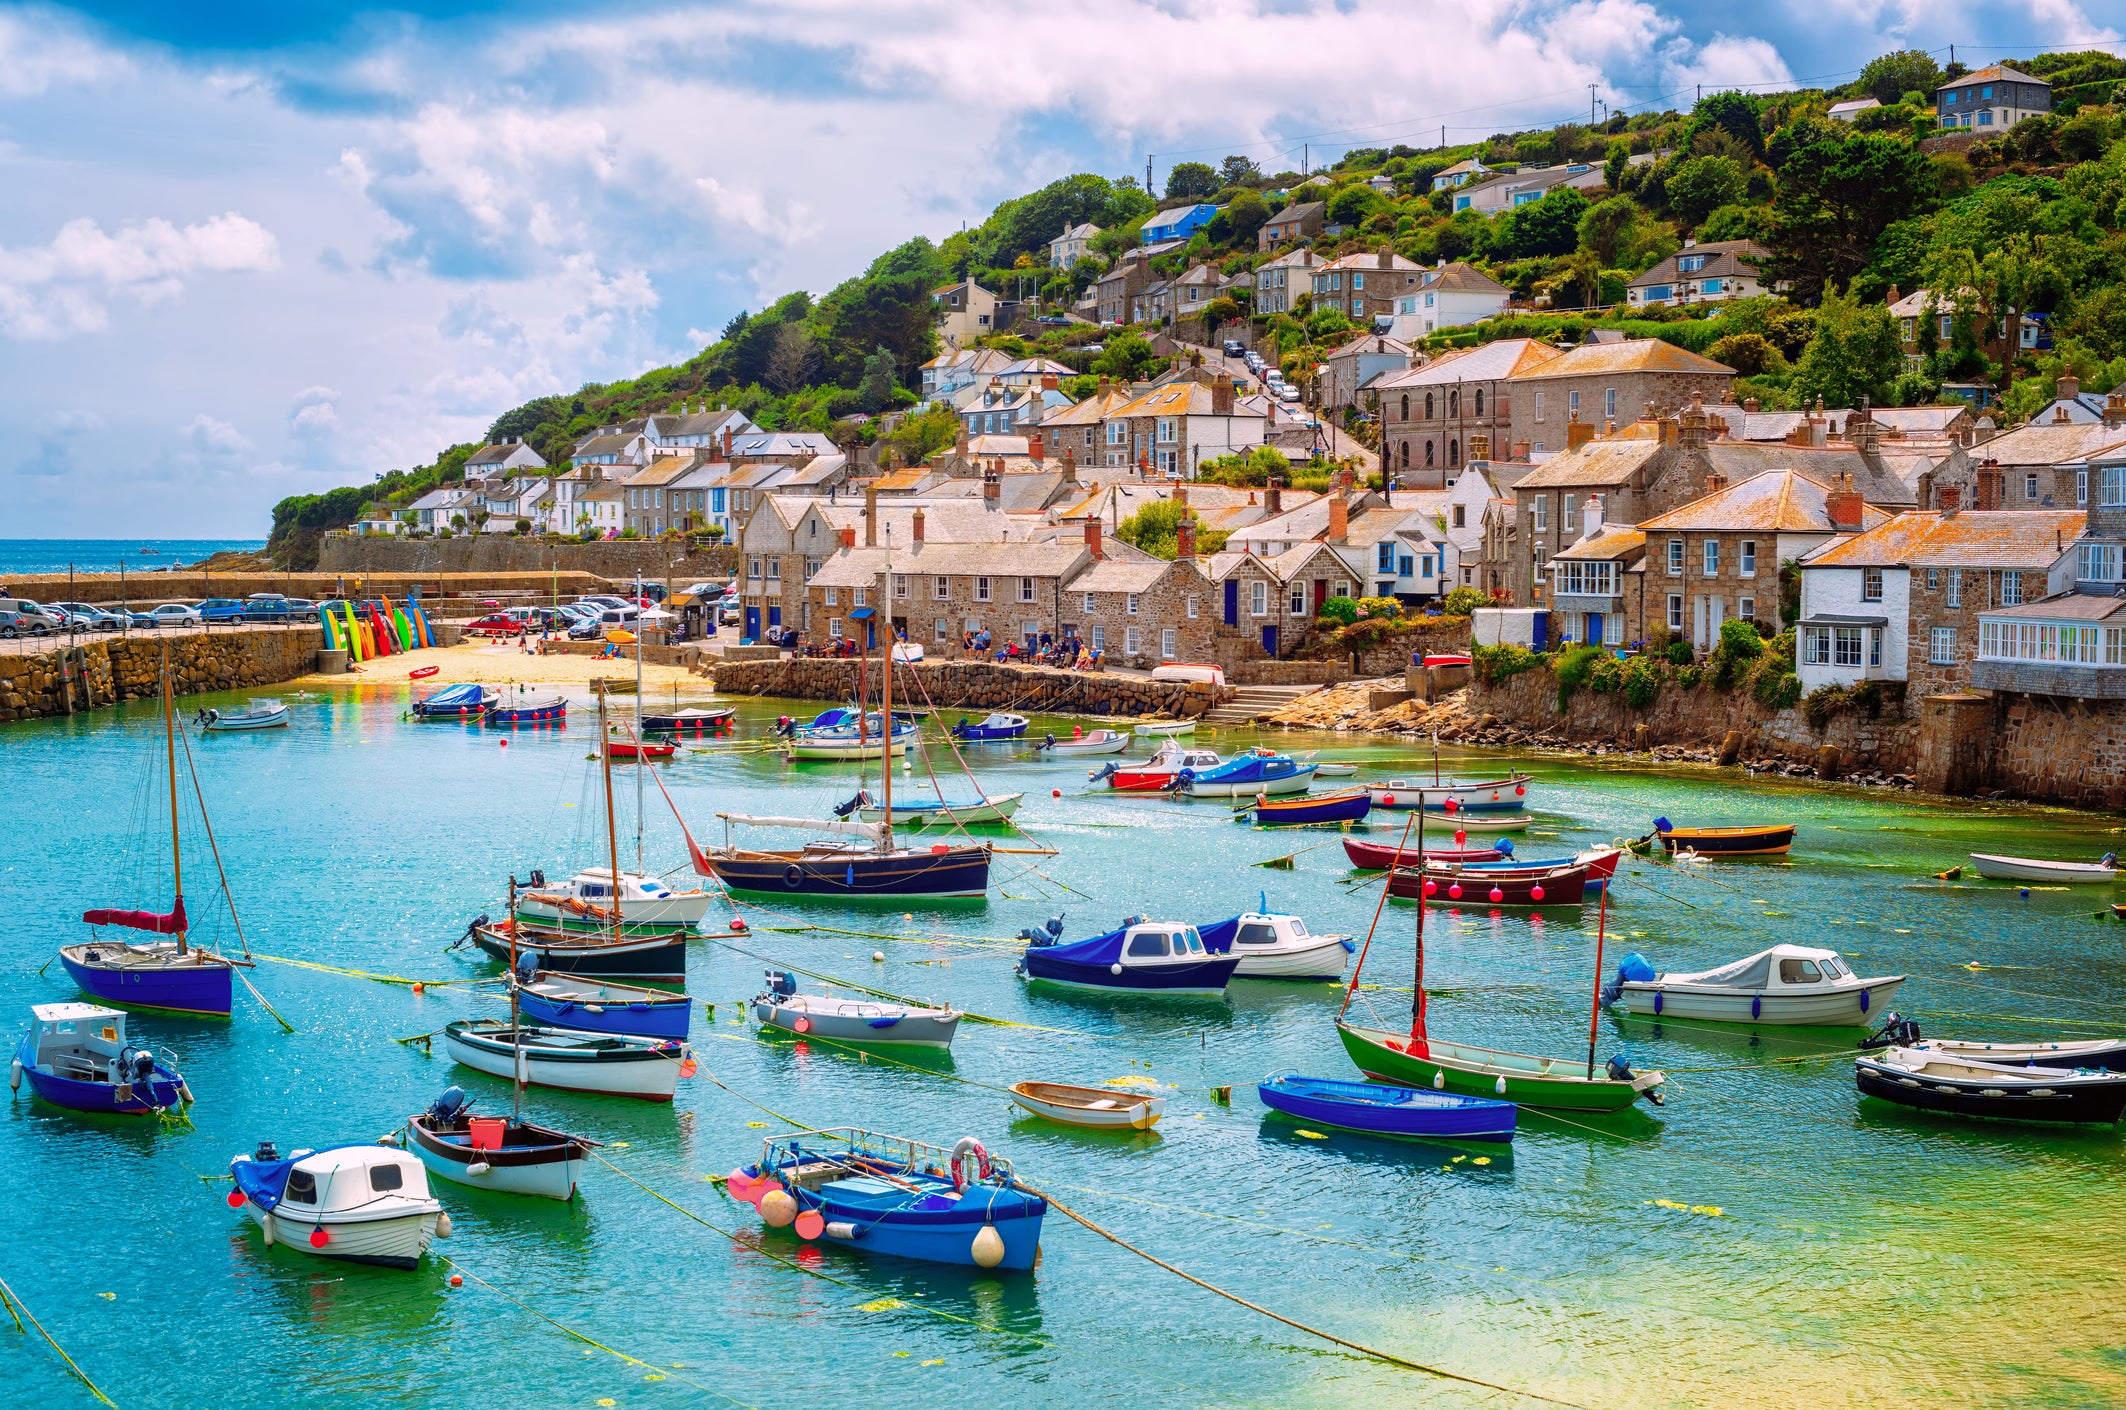 The village of Mousehole in Cornwall